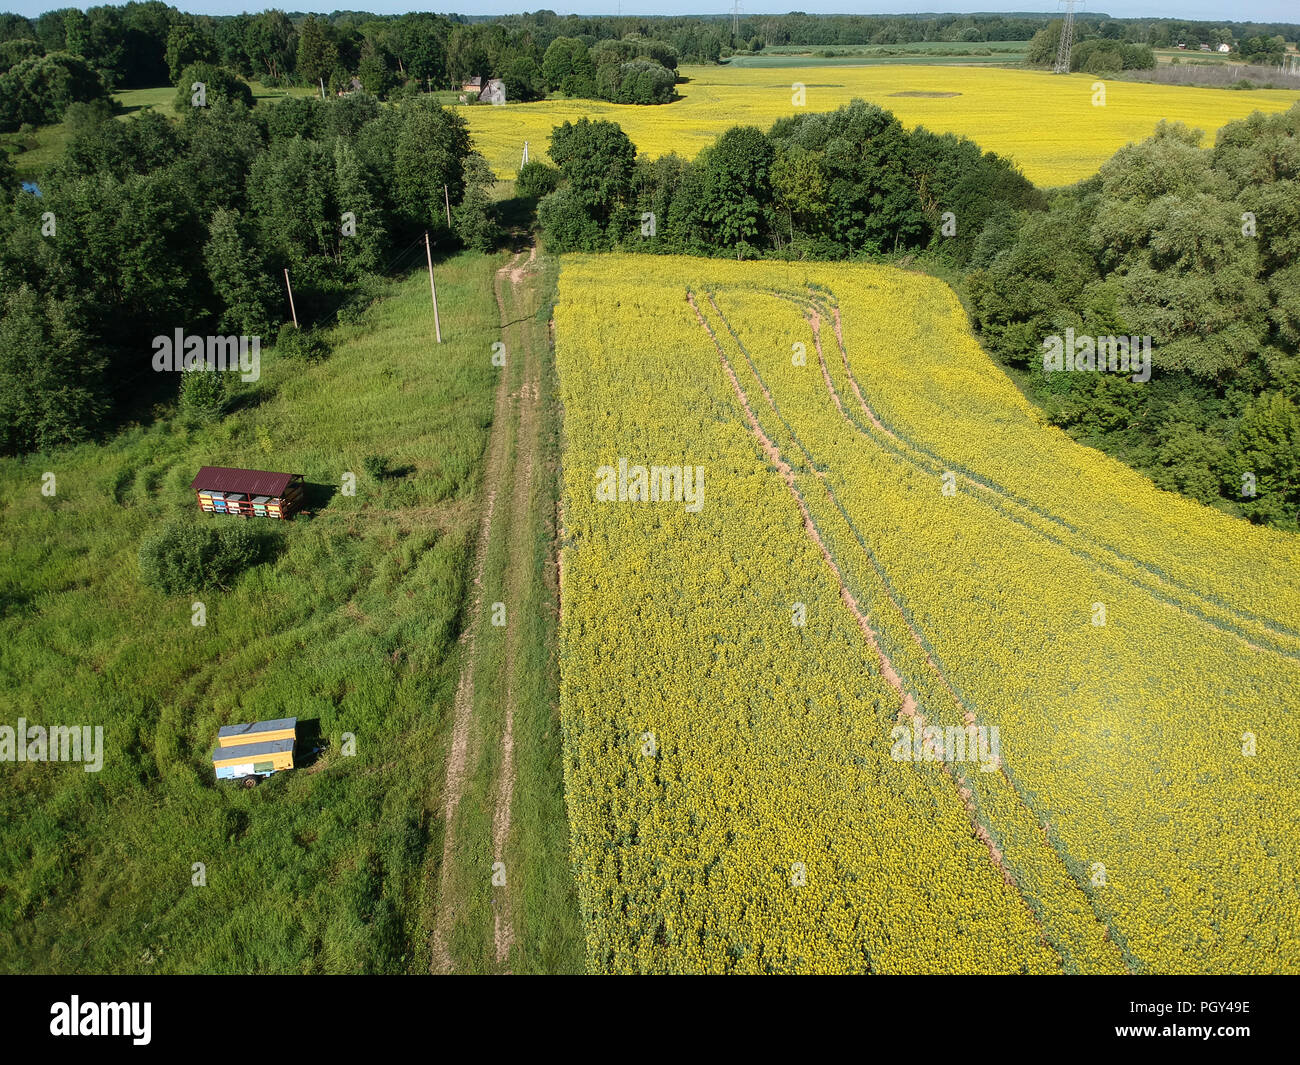 Summer blossoming rapeseed fields with two mobile beehives, aerial view Stock Photo